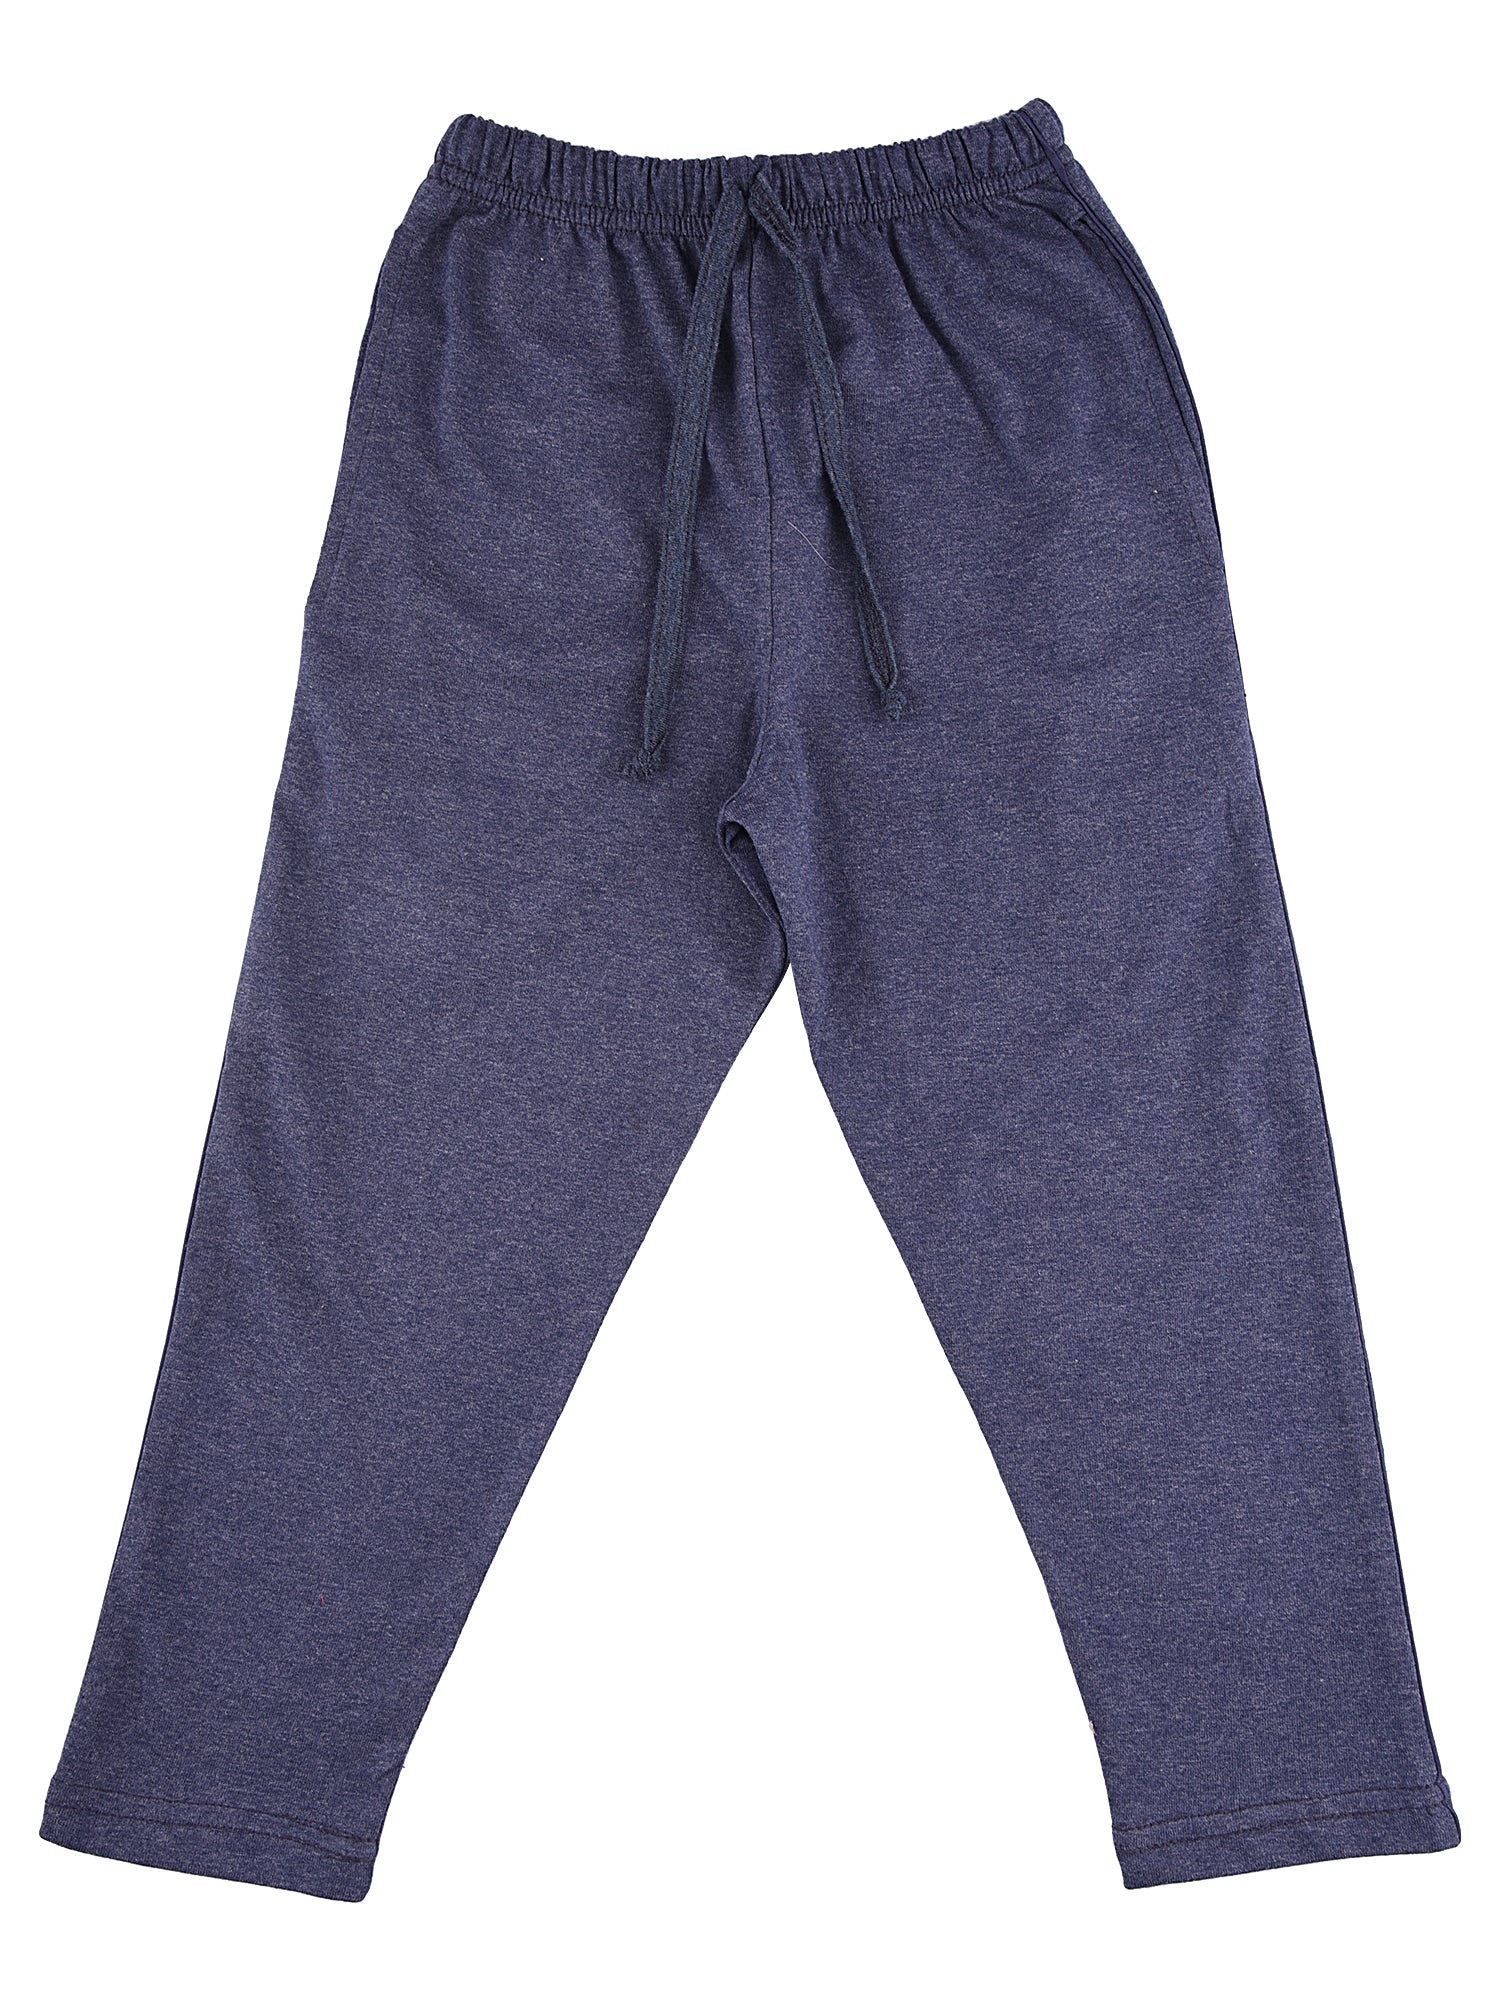 Track Pants Check Boys Black and Blue Cotton Trackpants at Cliths